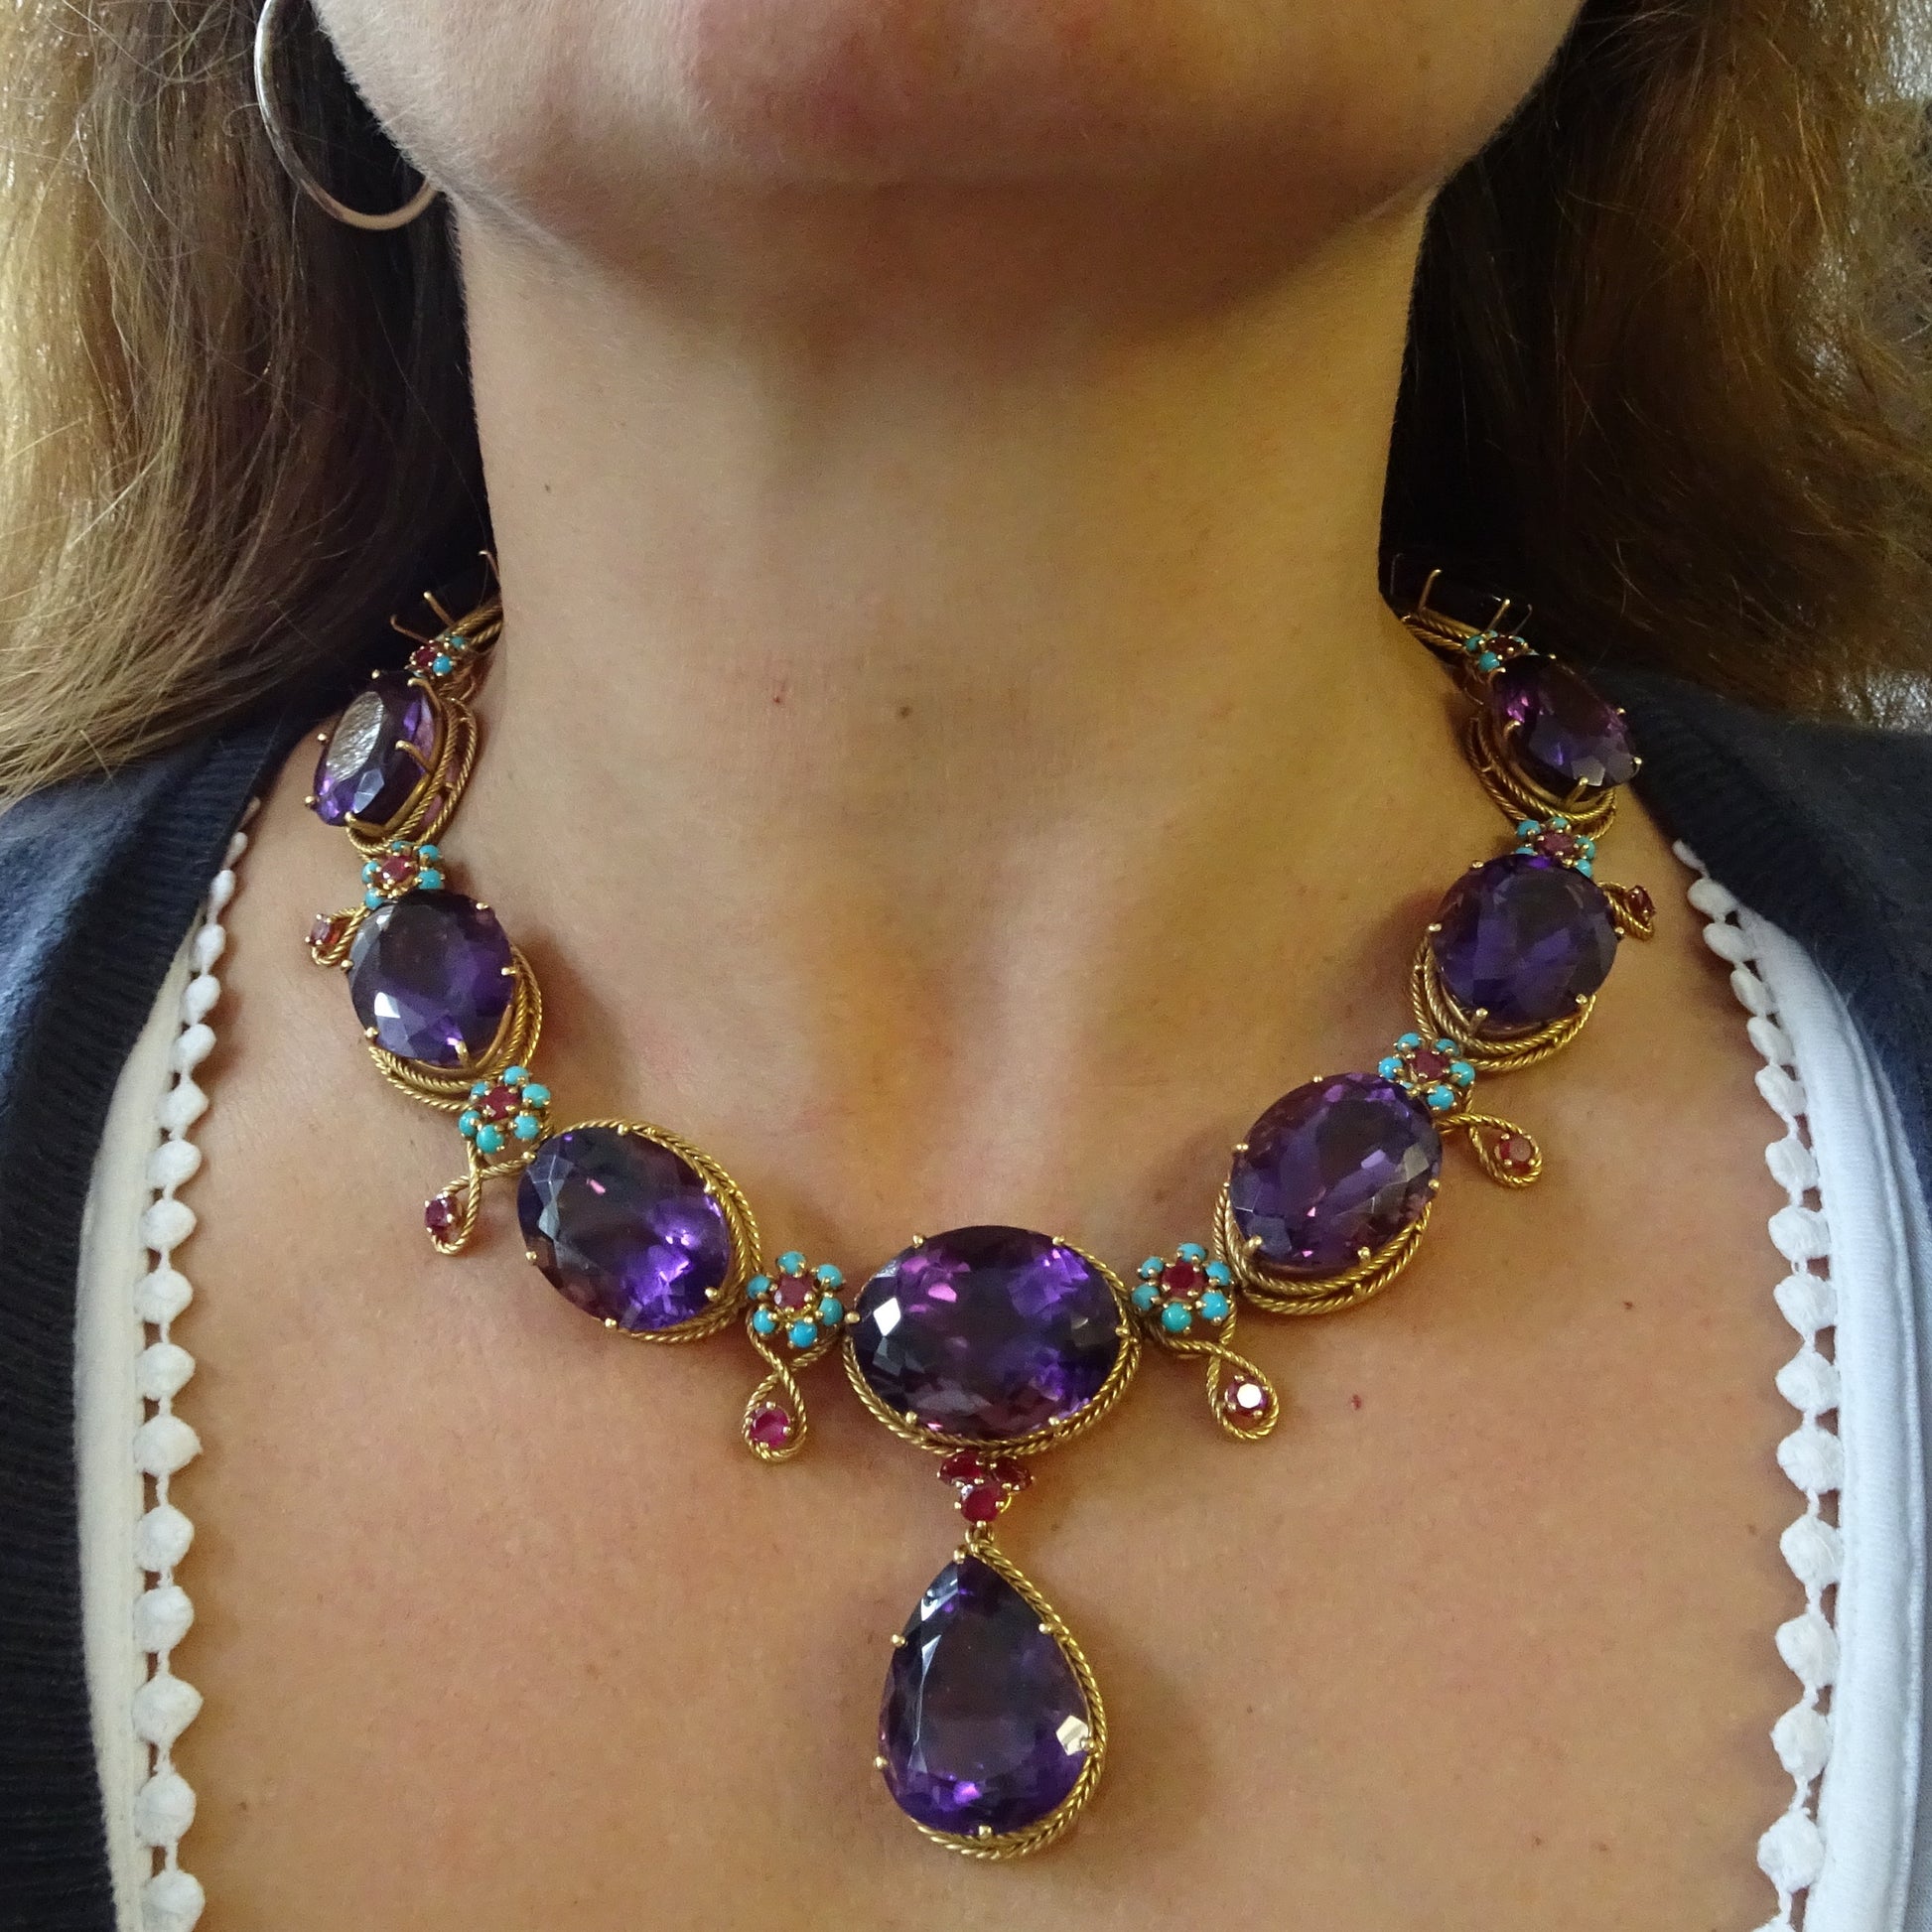 1960s 18KT Yellow Gold Amethyst, Ruby & Turquoise Necklace worn on neck